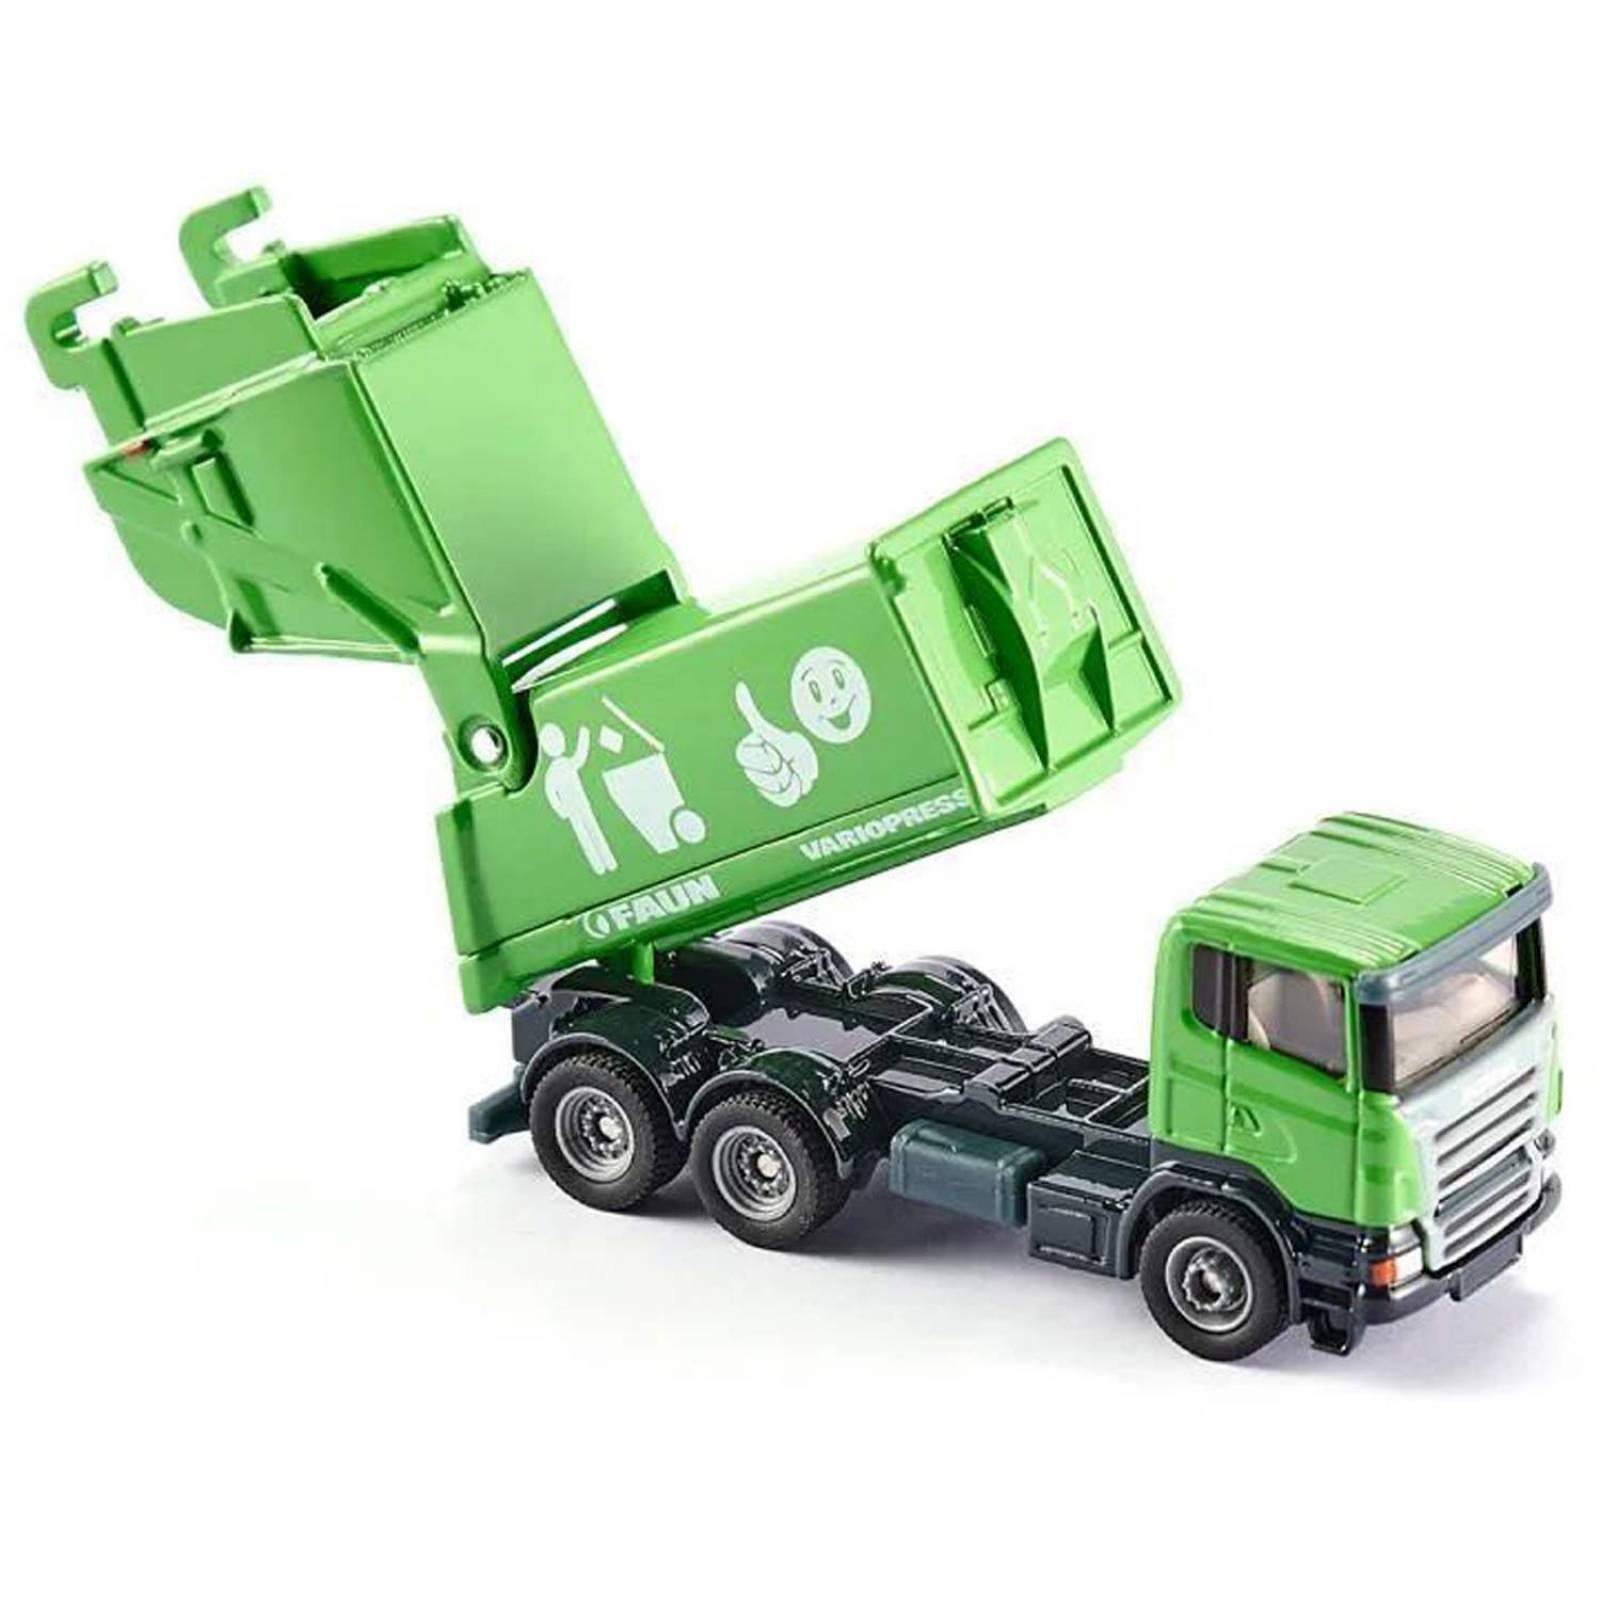 Dustbin Lorry Recycling Truck - Single Die-Cast Toy Vehicle 1890 thumbnails